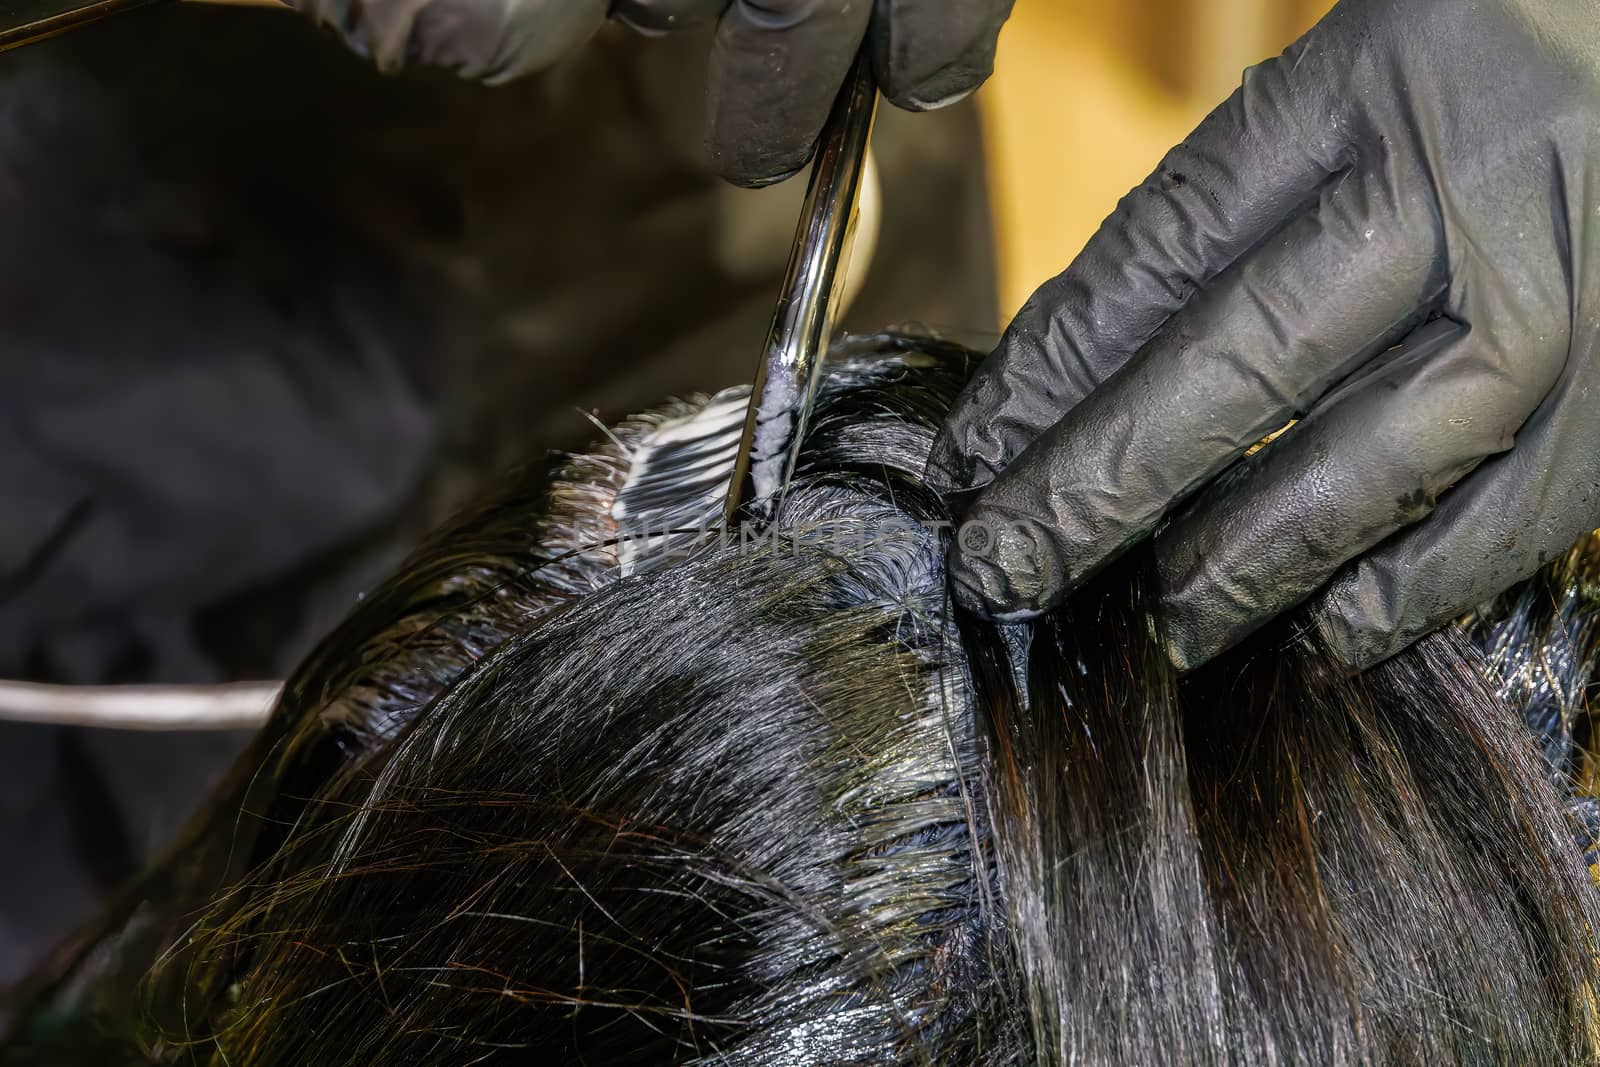 At-home hair coloring styling with a solid level of black paint mix coverage, using a brush on the hair roots.